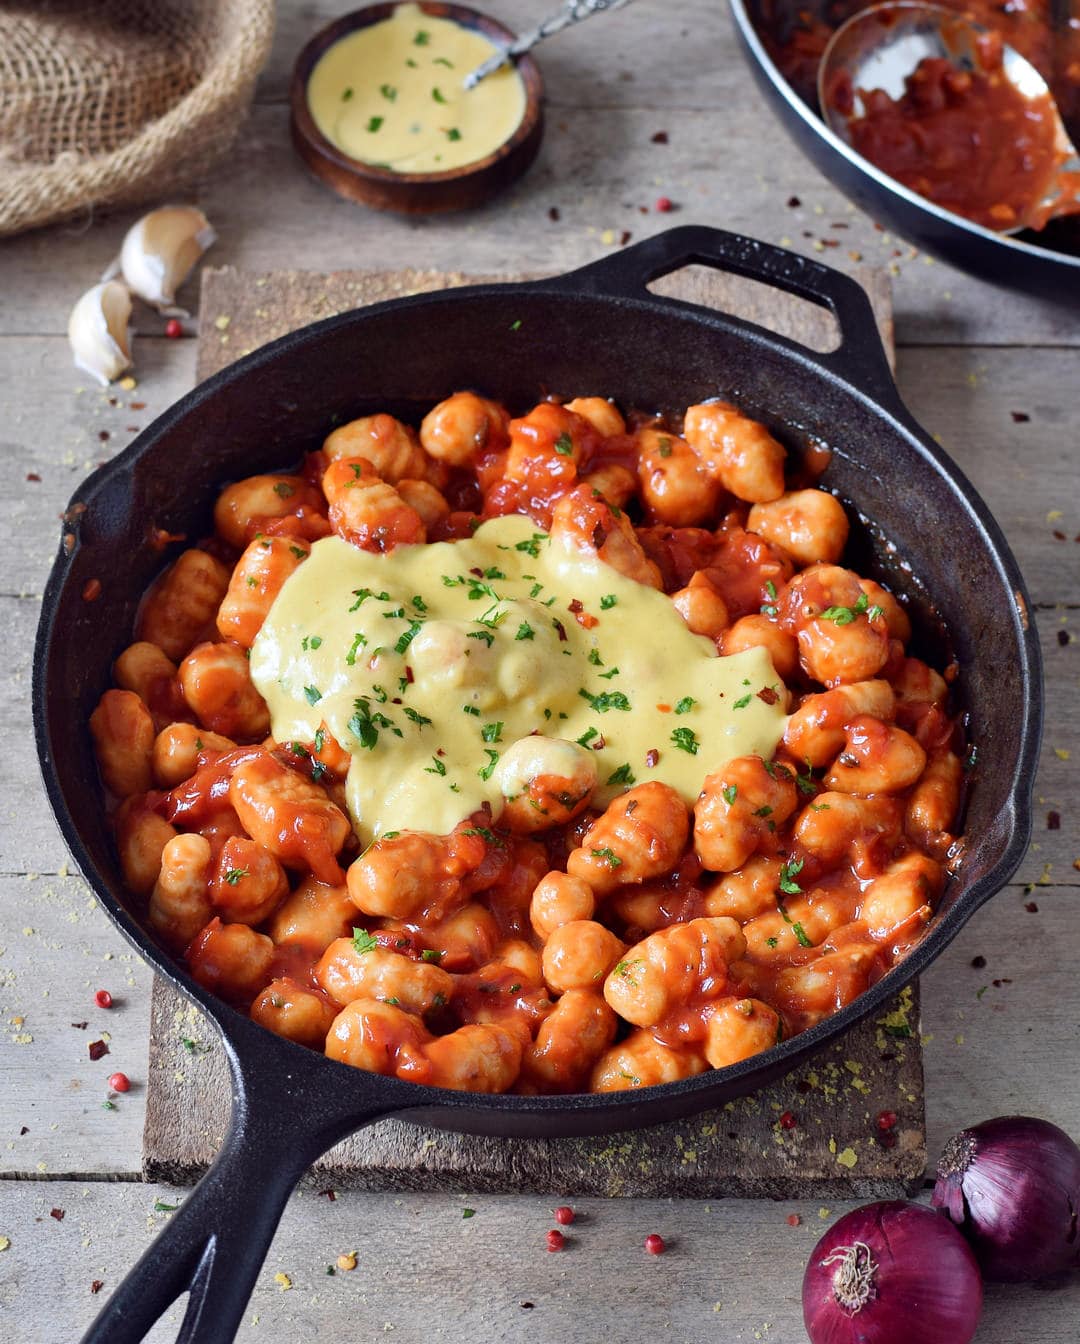 gnocchi all'arrabbiata in a skillet with vegan cheese sauce